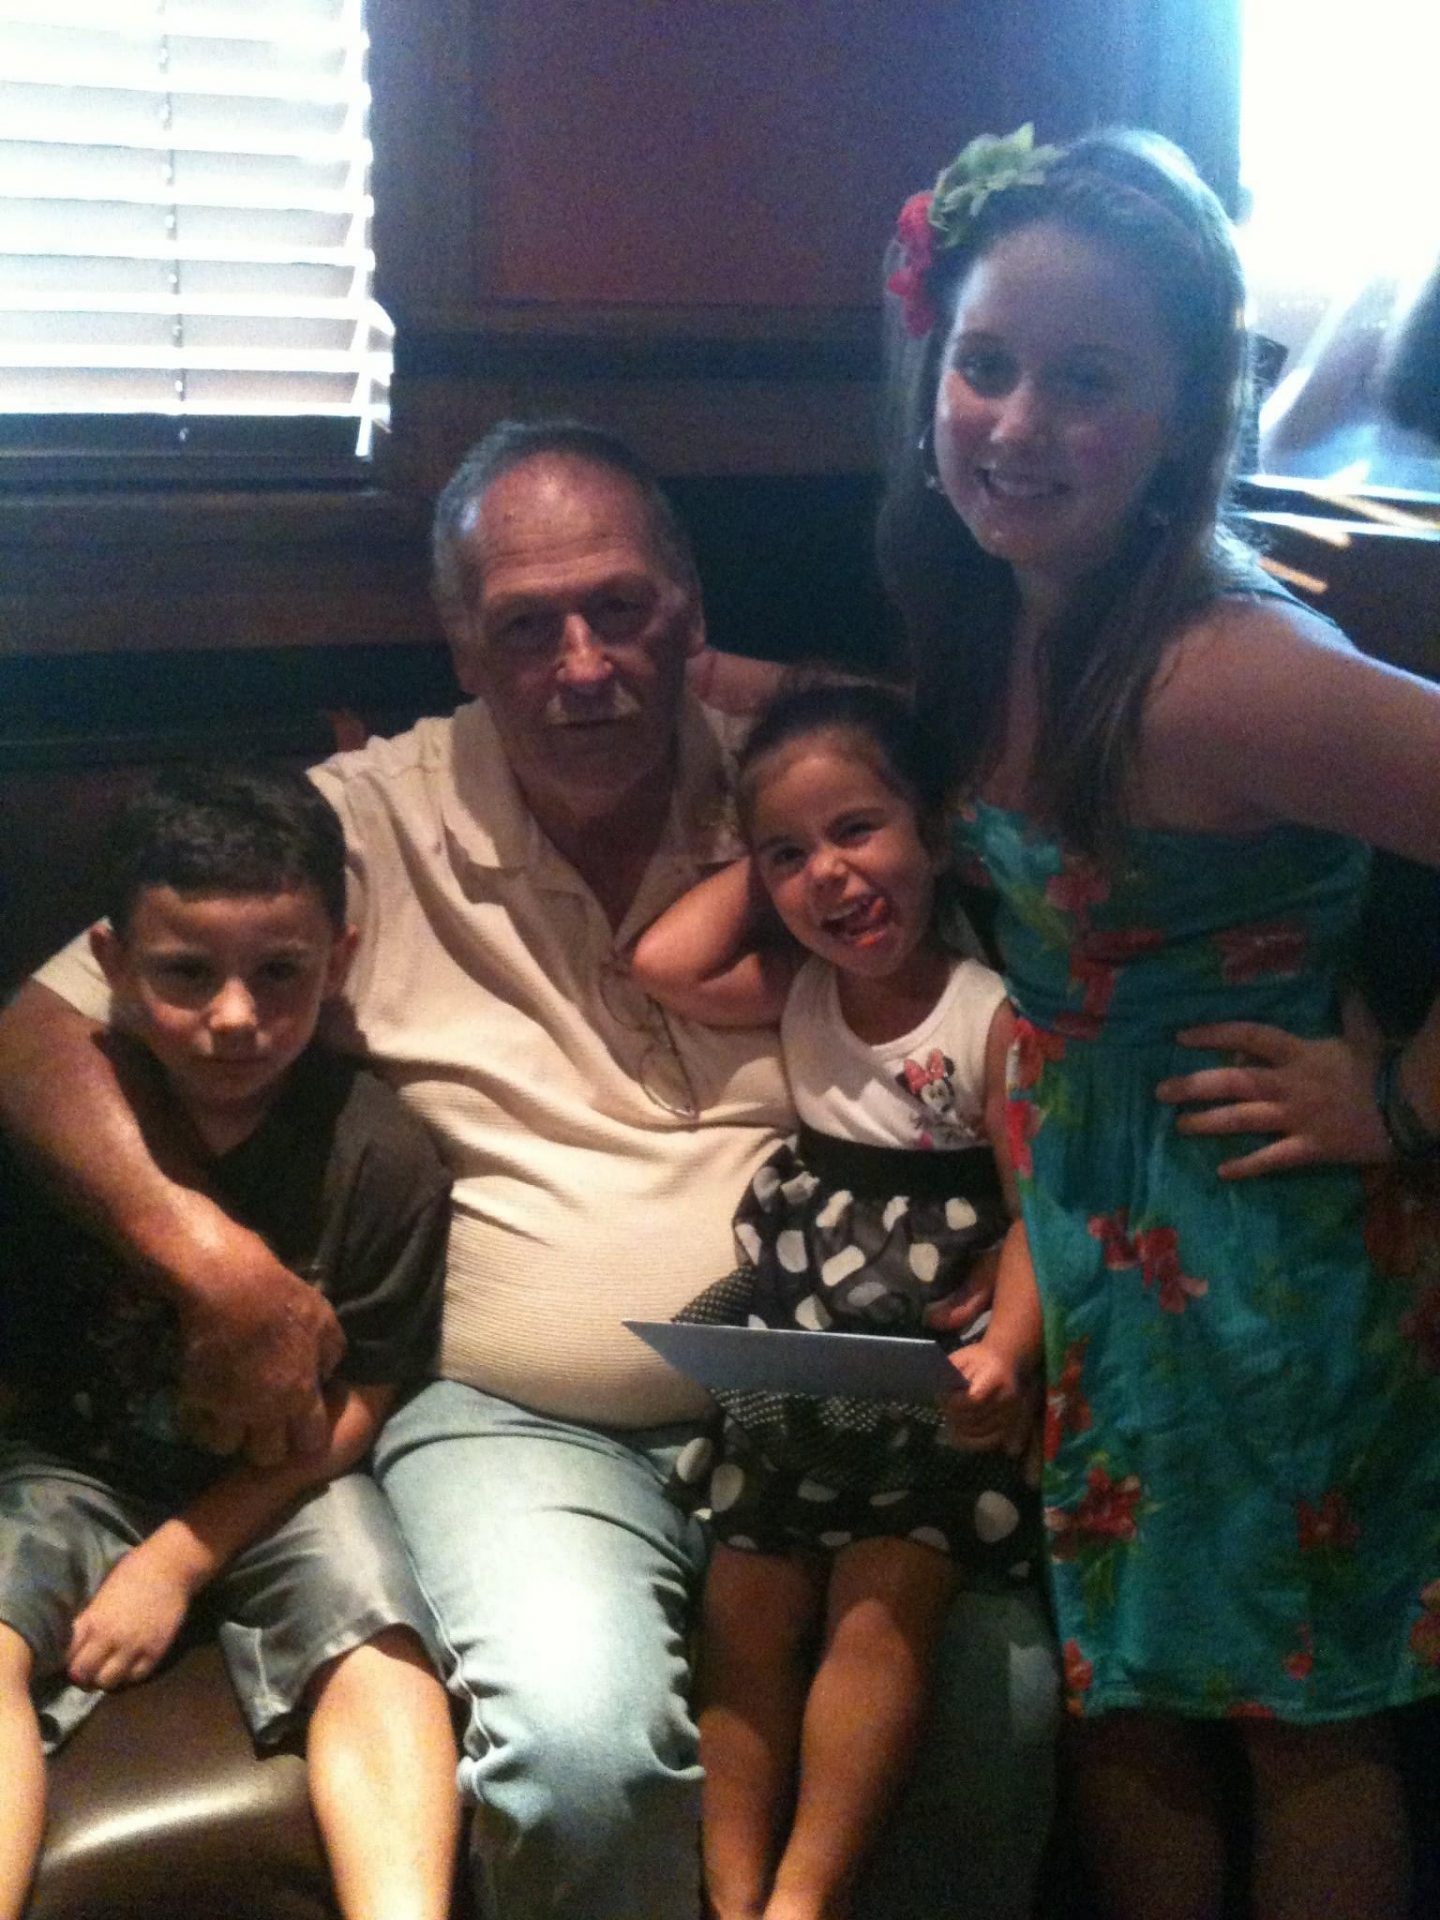 Celebrating one of his birthdays with his grandkids at his most favorite places, Outback.